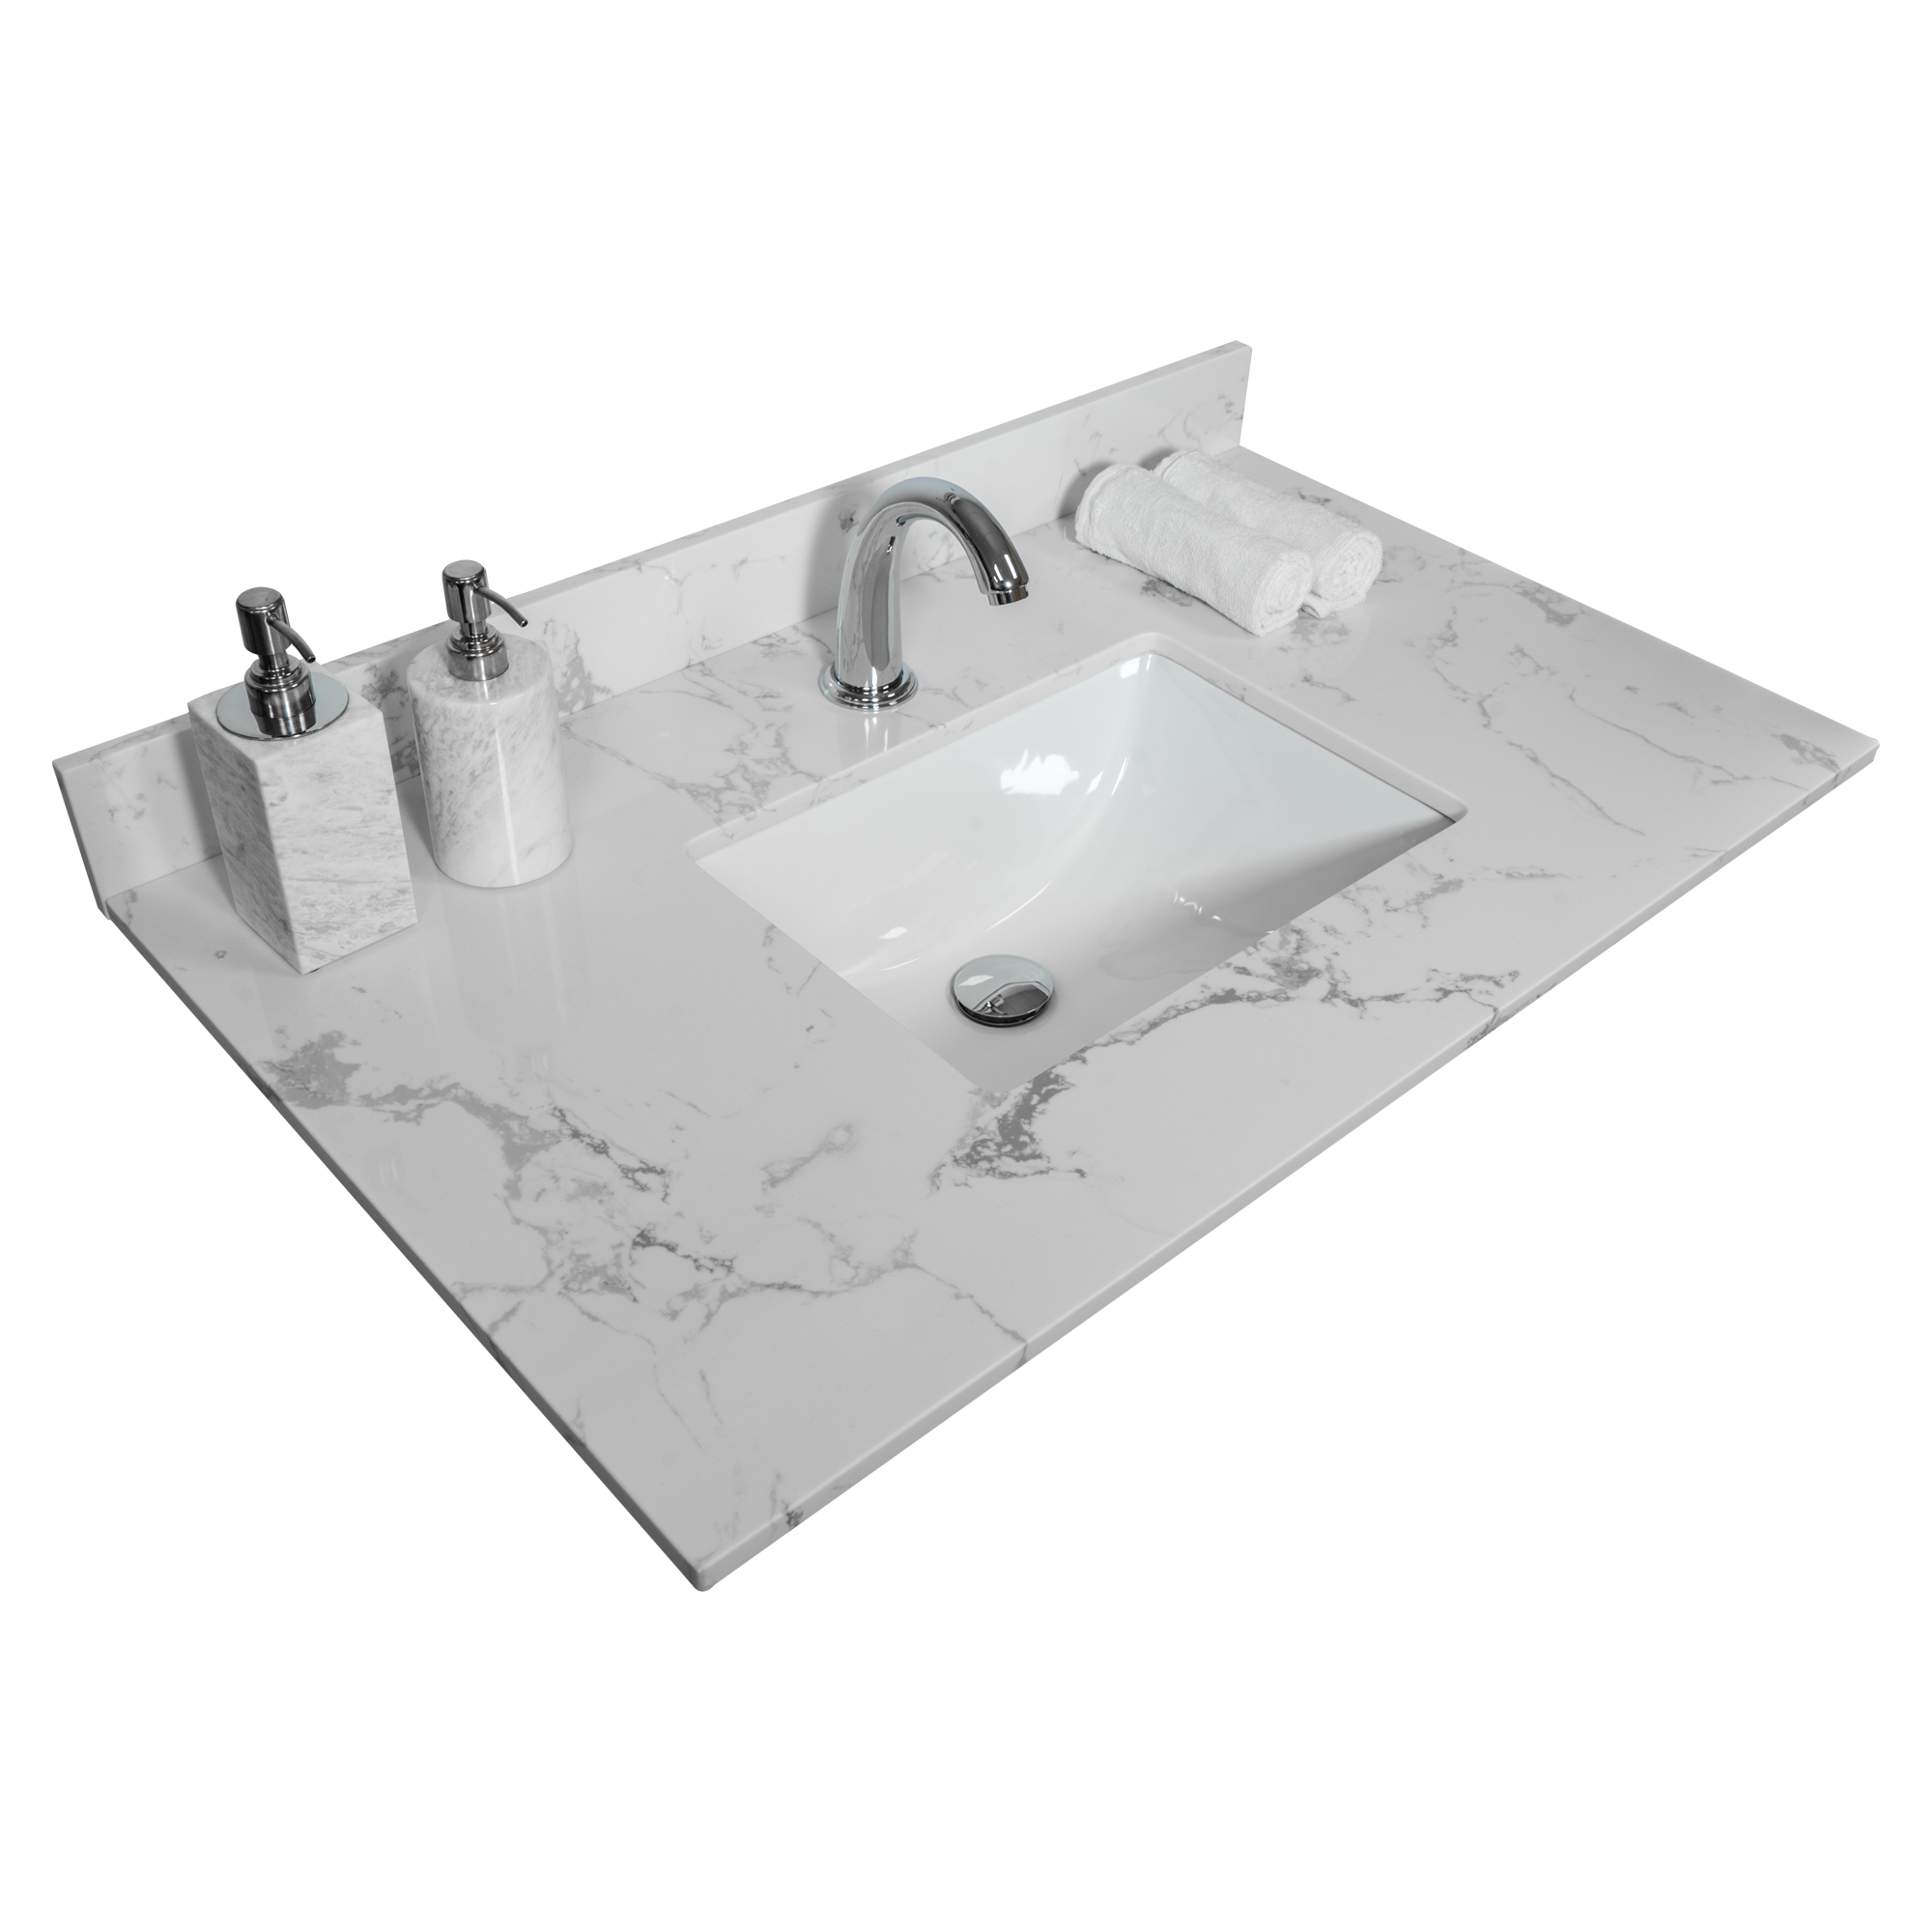 Montary 31inch bathroom stone vanity top engineered white marble color with undermount ceramic sink and single faucet hole with backsplash-Boyel Living